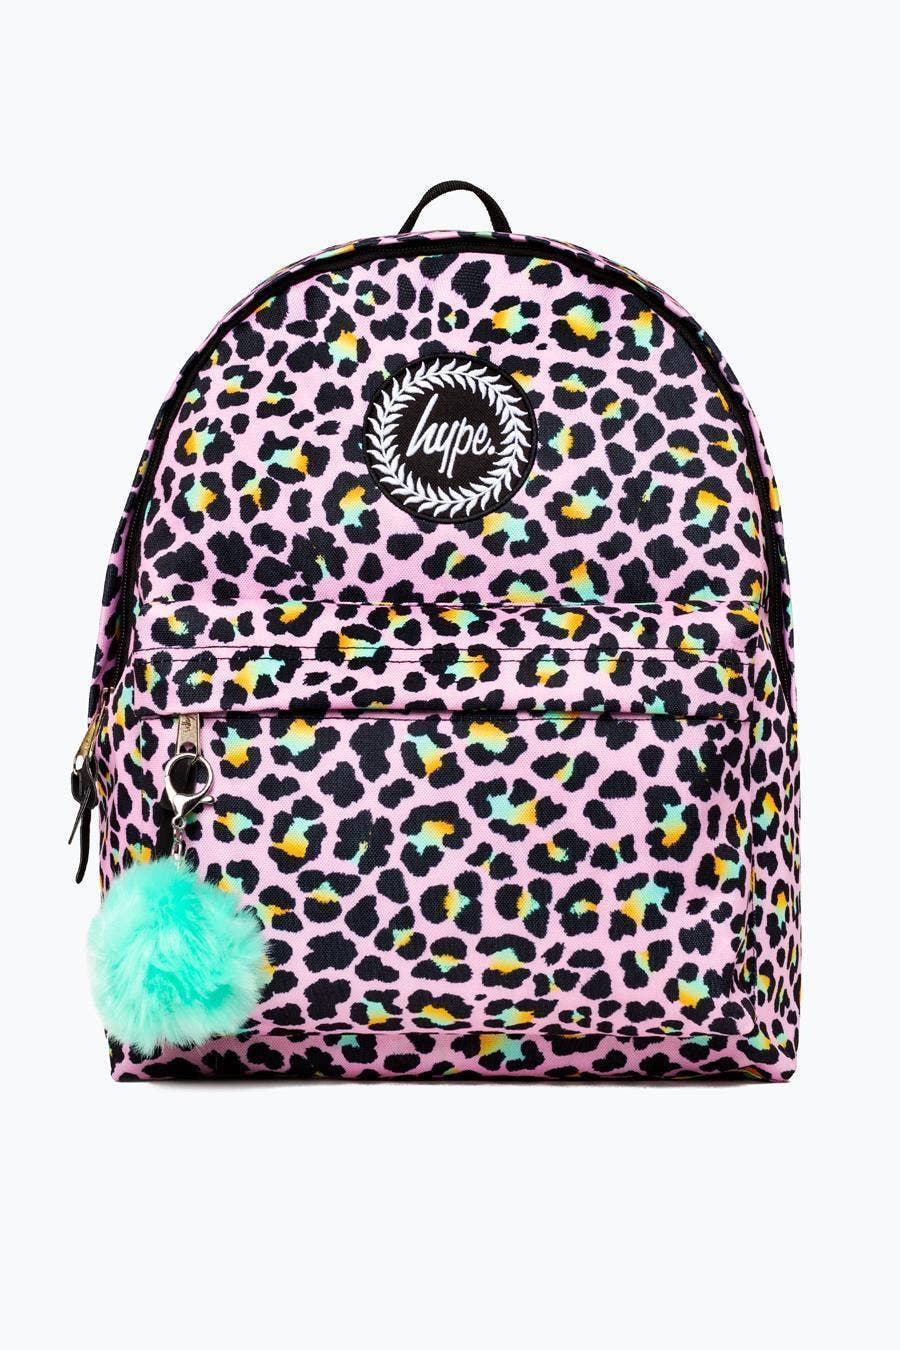 Hype - HYPE DISCO LEOPARD BACKPACK